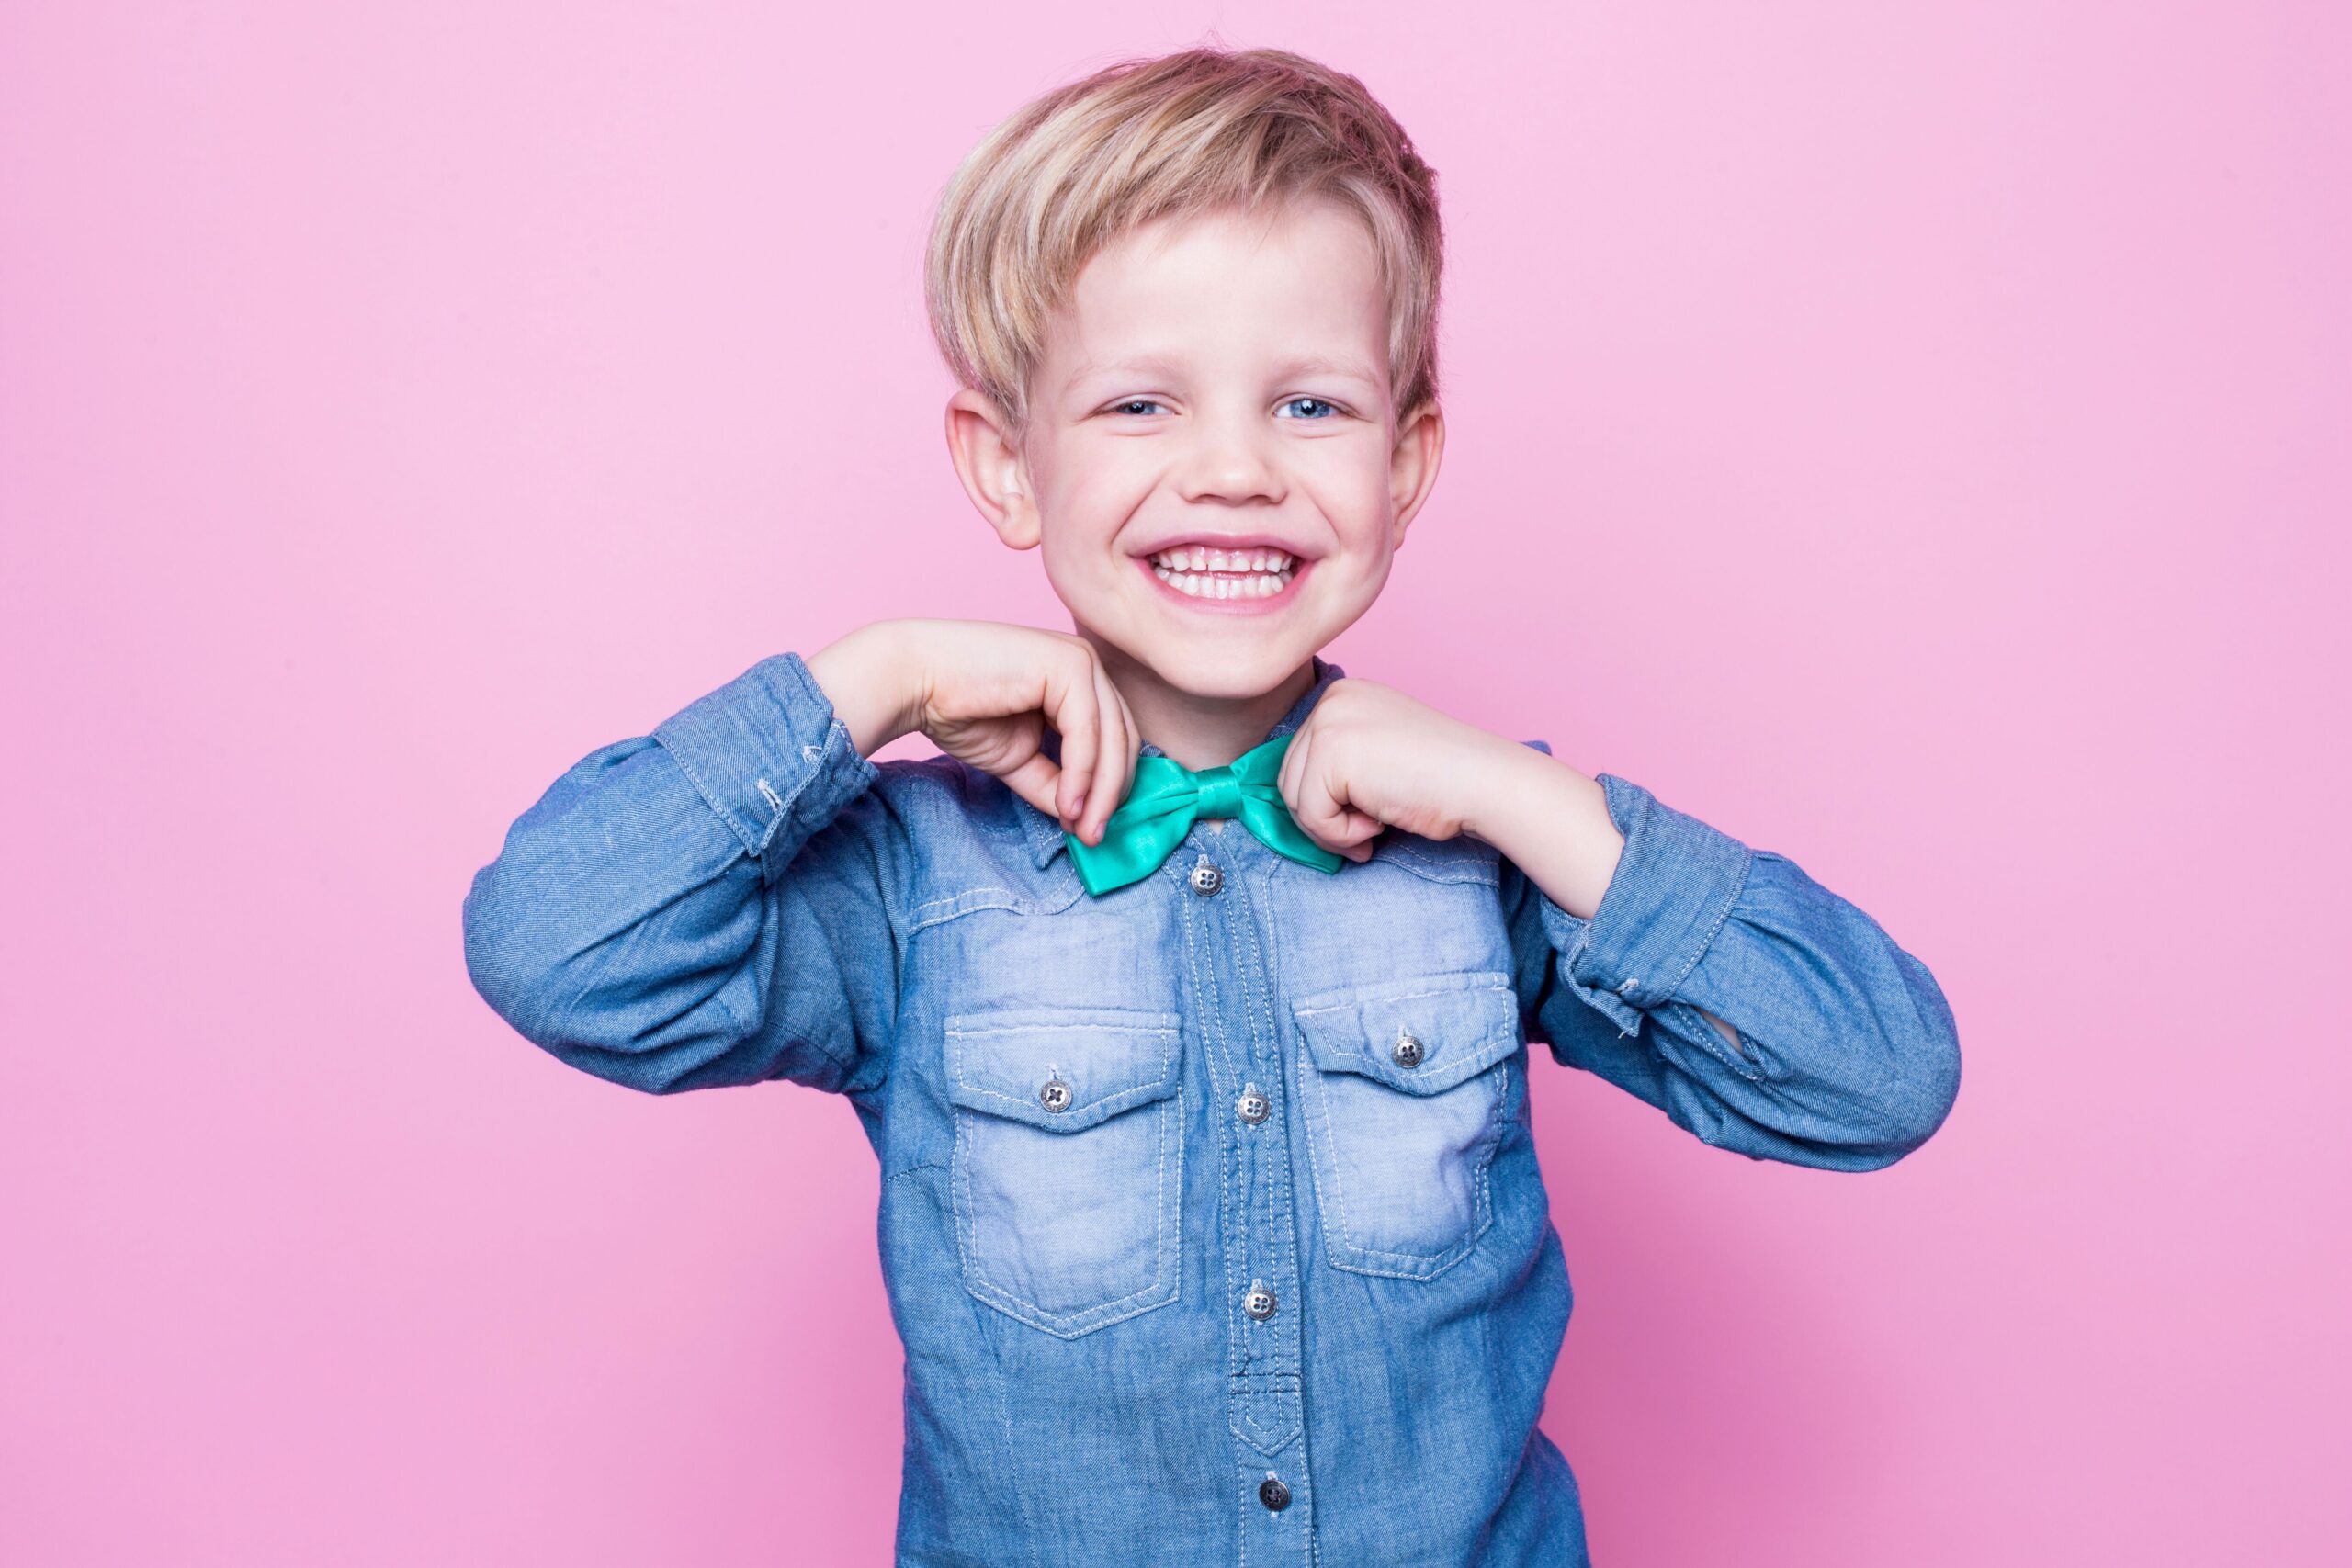 Tyler TX Pediatric Dentist | Is Your Child Excited to Visit Us?